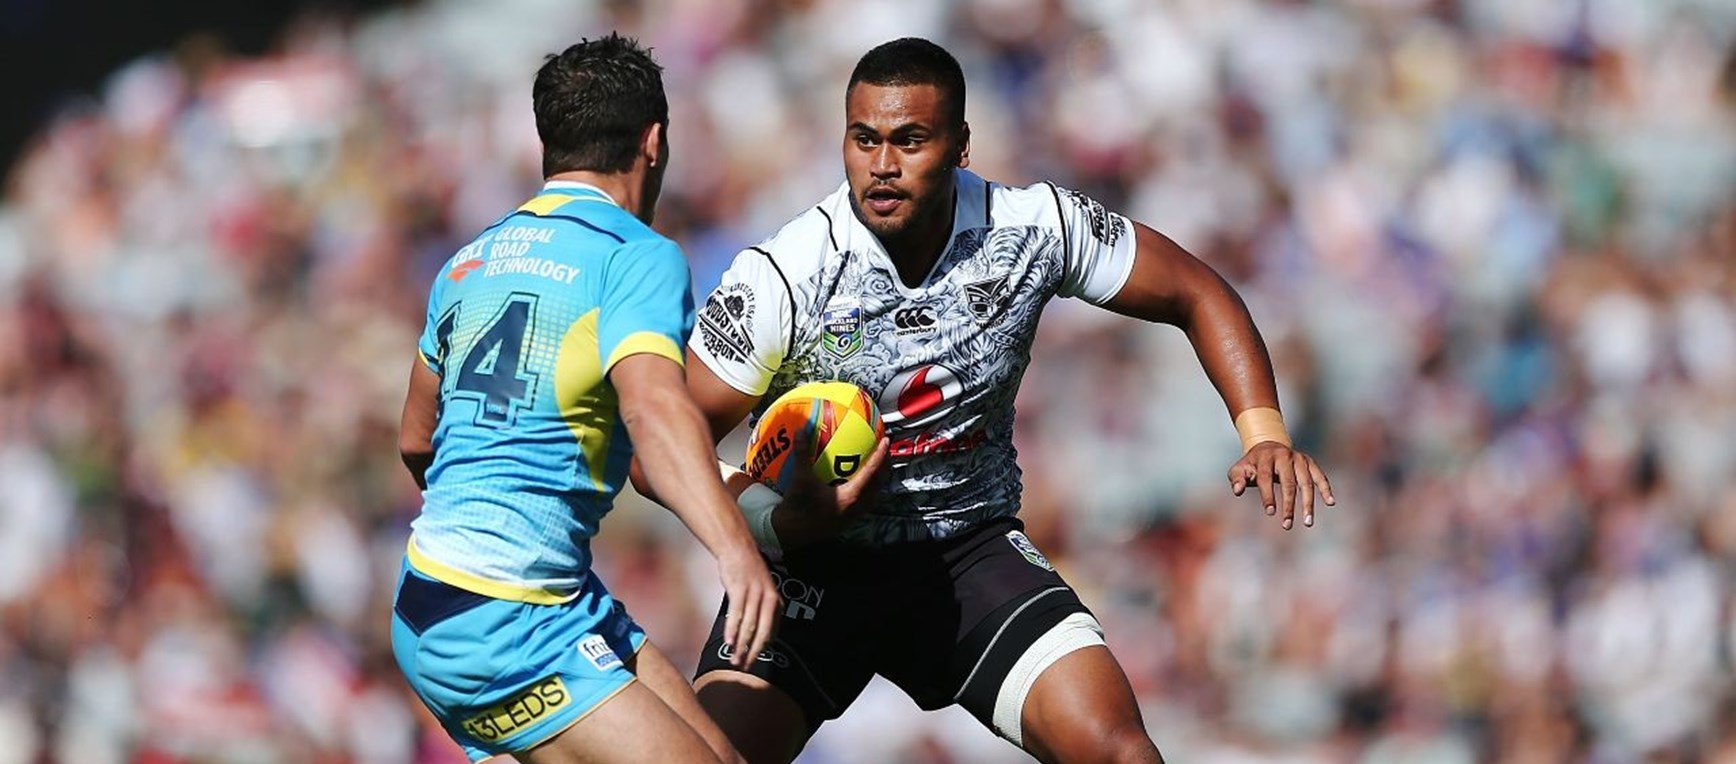 #NRLAKL9s day two in pictures